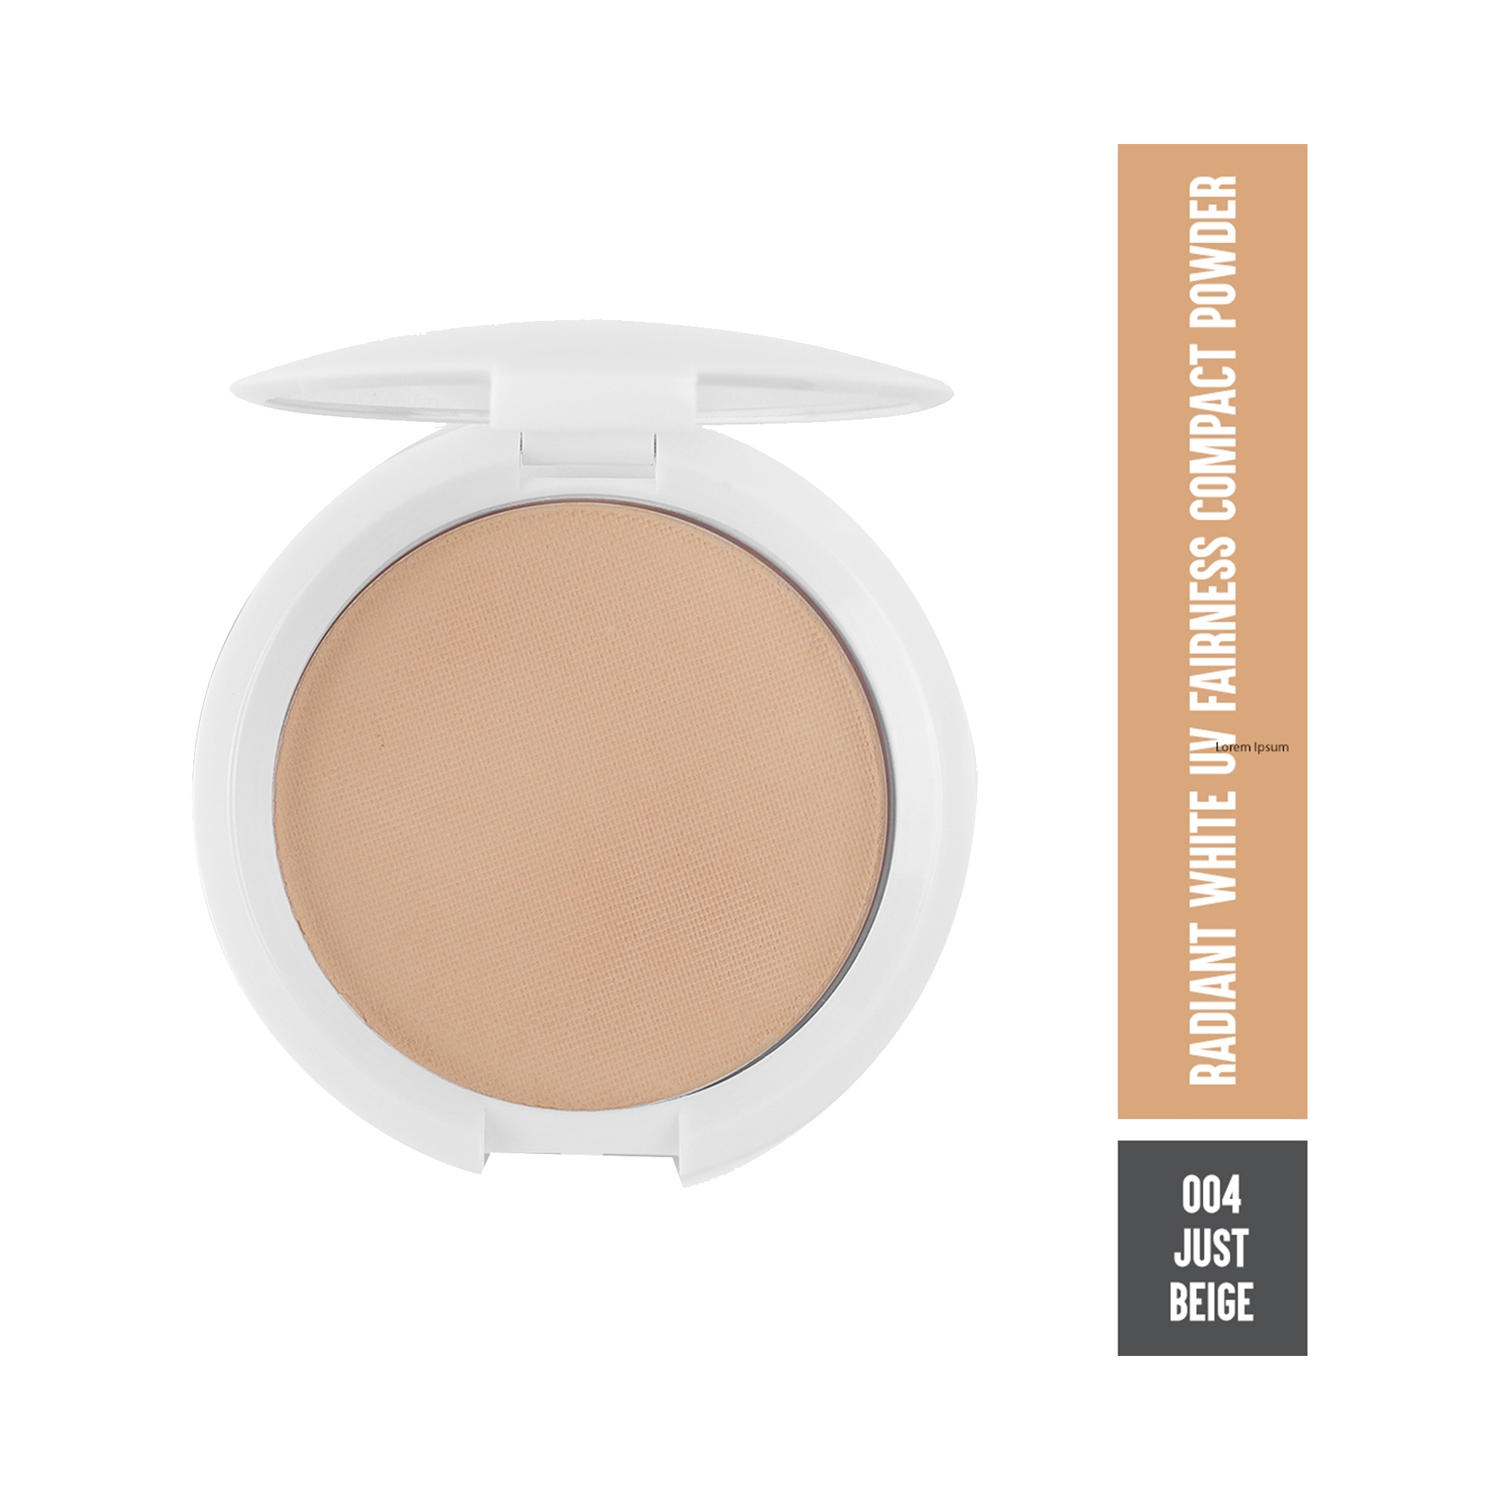 Colorbar | Colorbar Radiant White UV Fairness Compact Powder With SPF 18 - 004 Just Beige (9g)